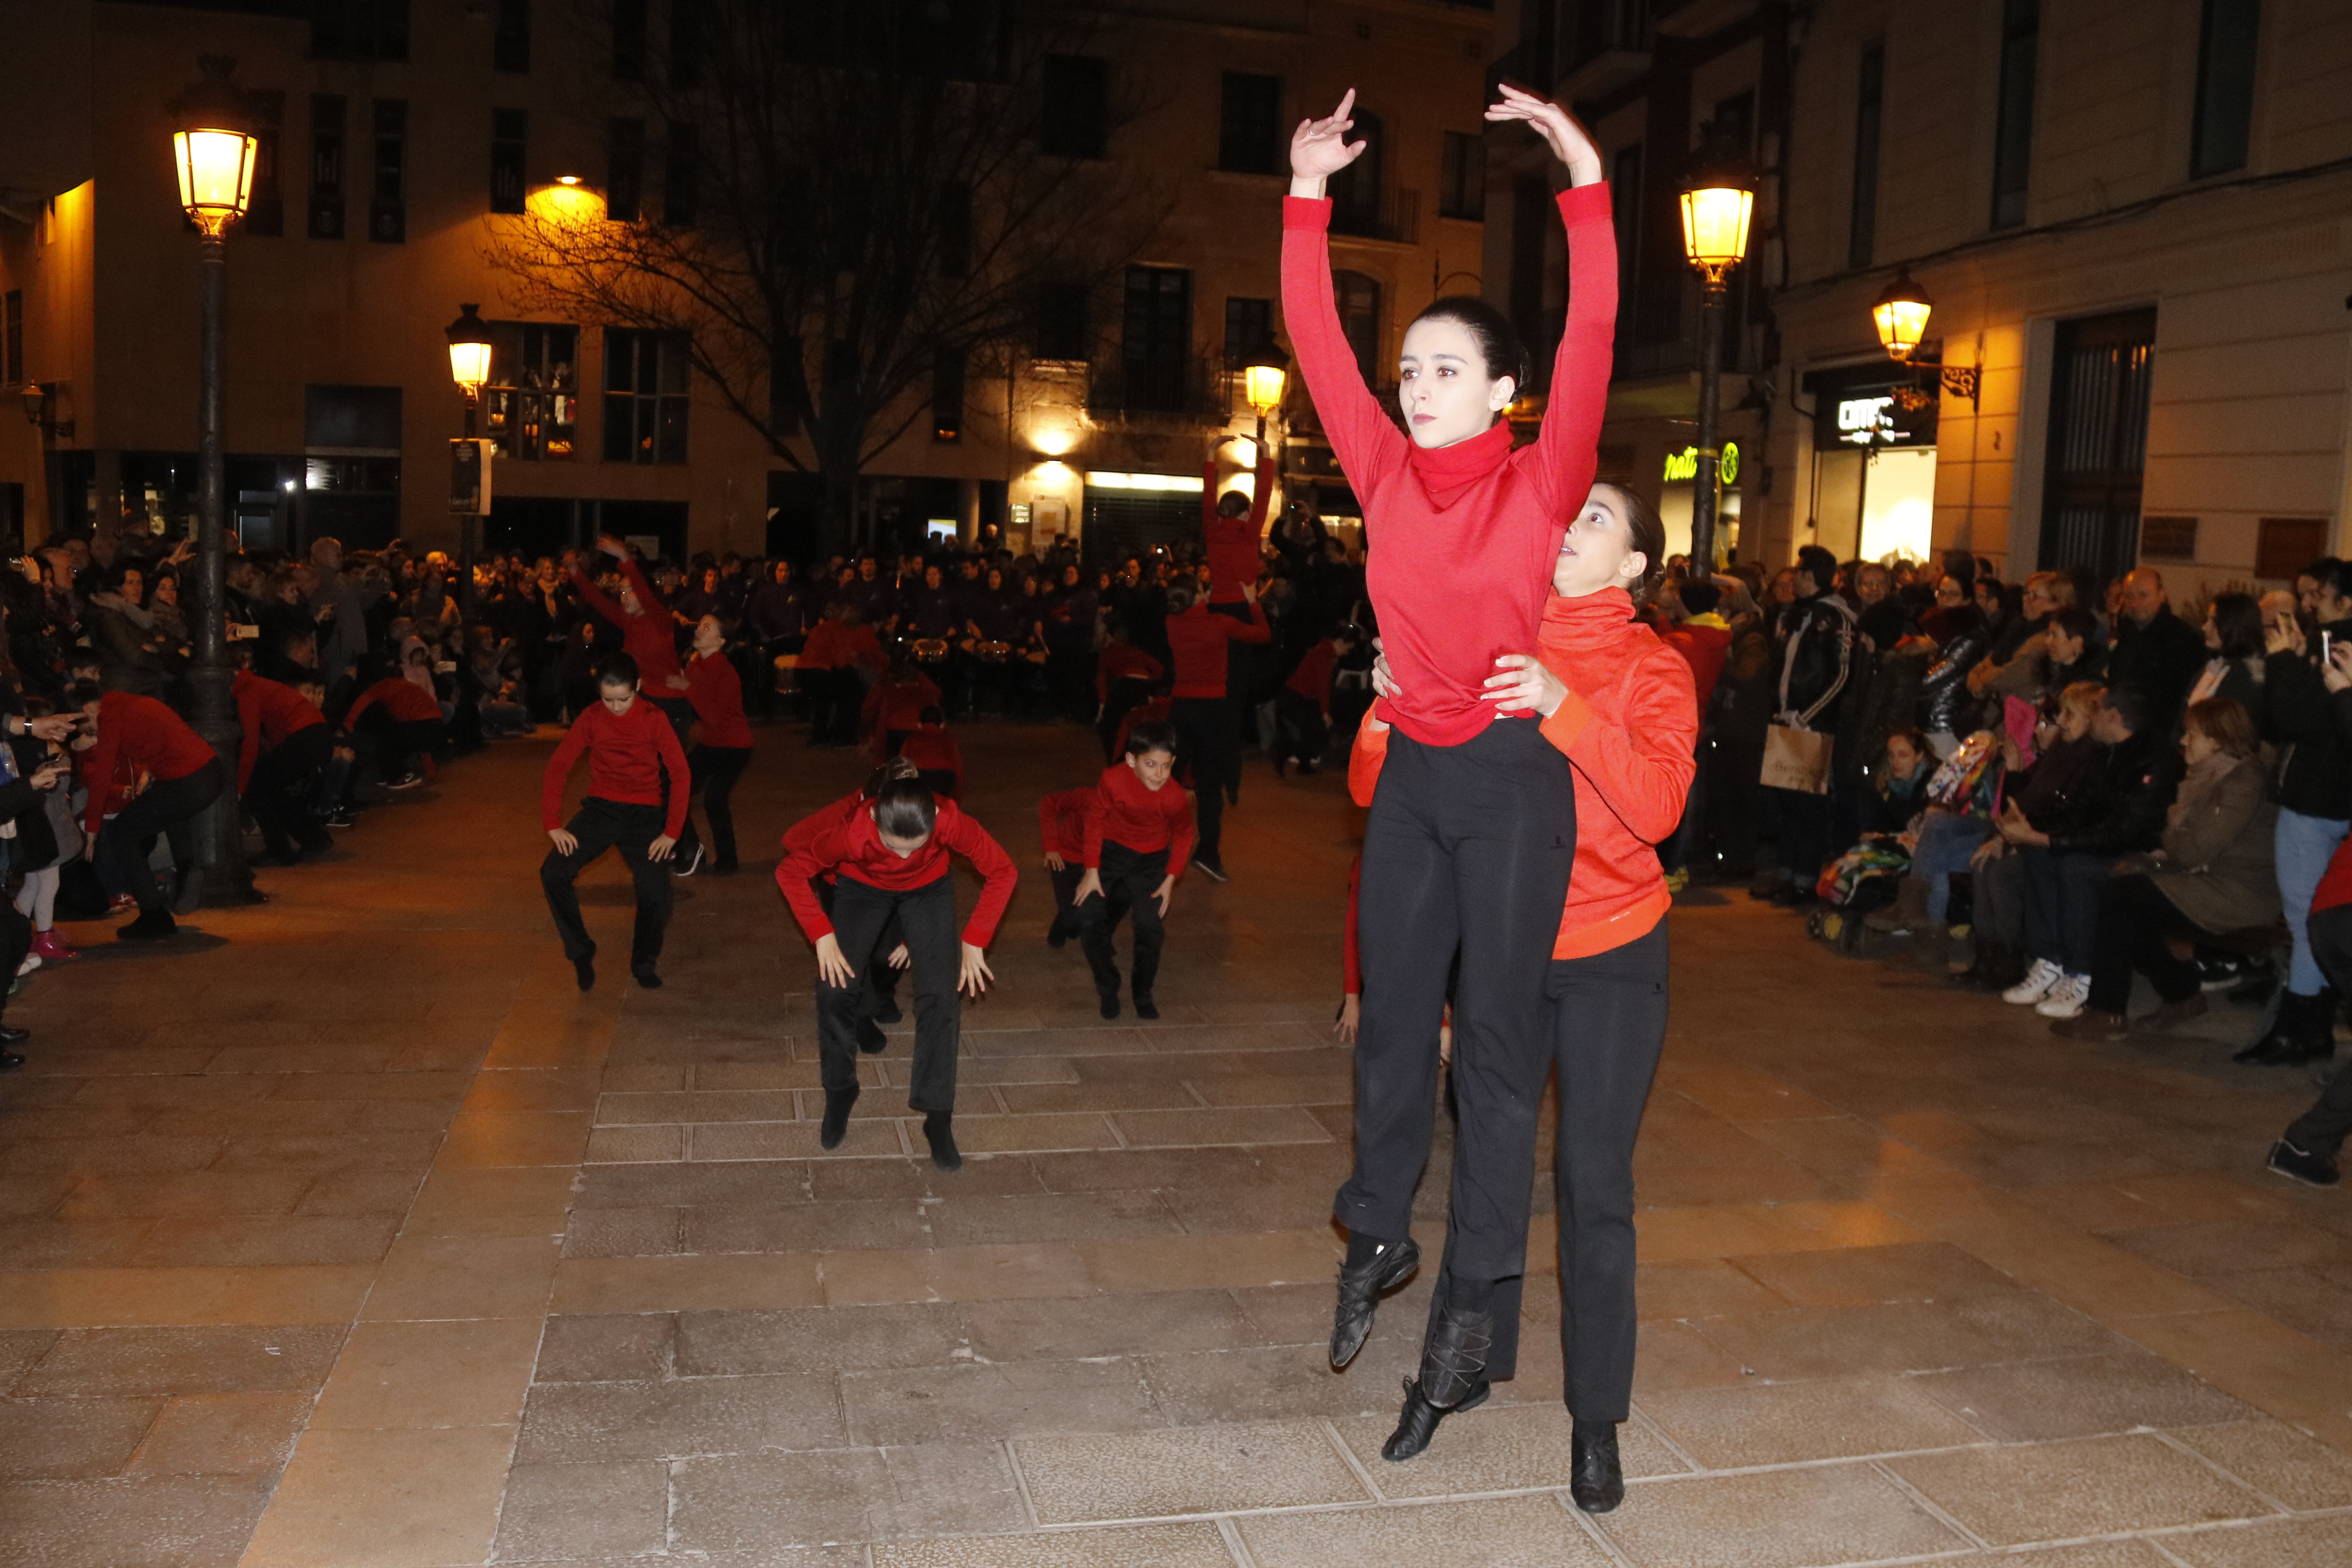 A dance performance in the street of Manresa for its inauguration as the Catalan culture capital of 2018 on January 20 (by Jordi Pujolar) 